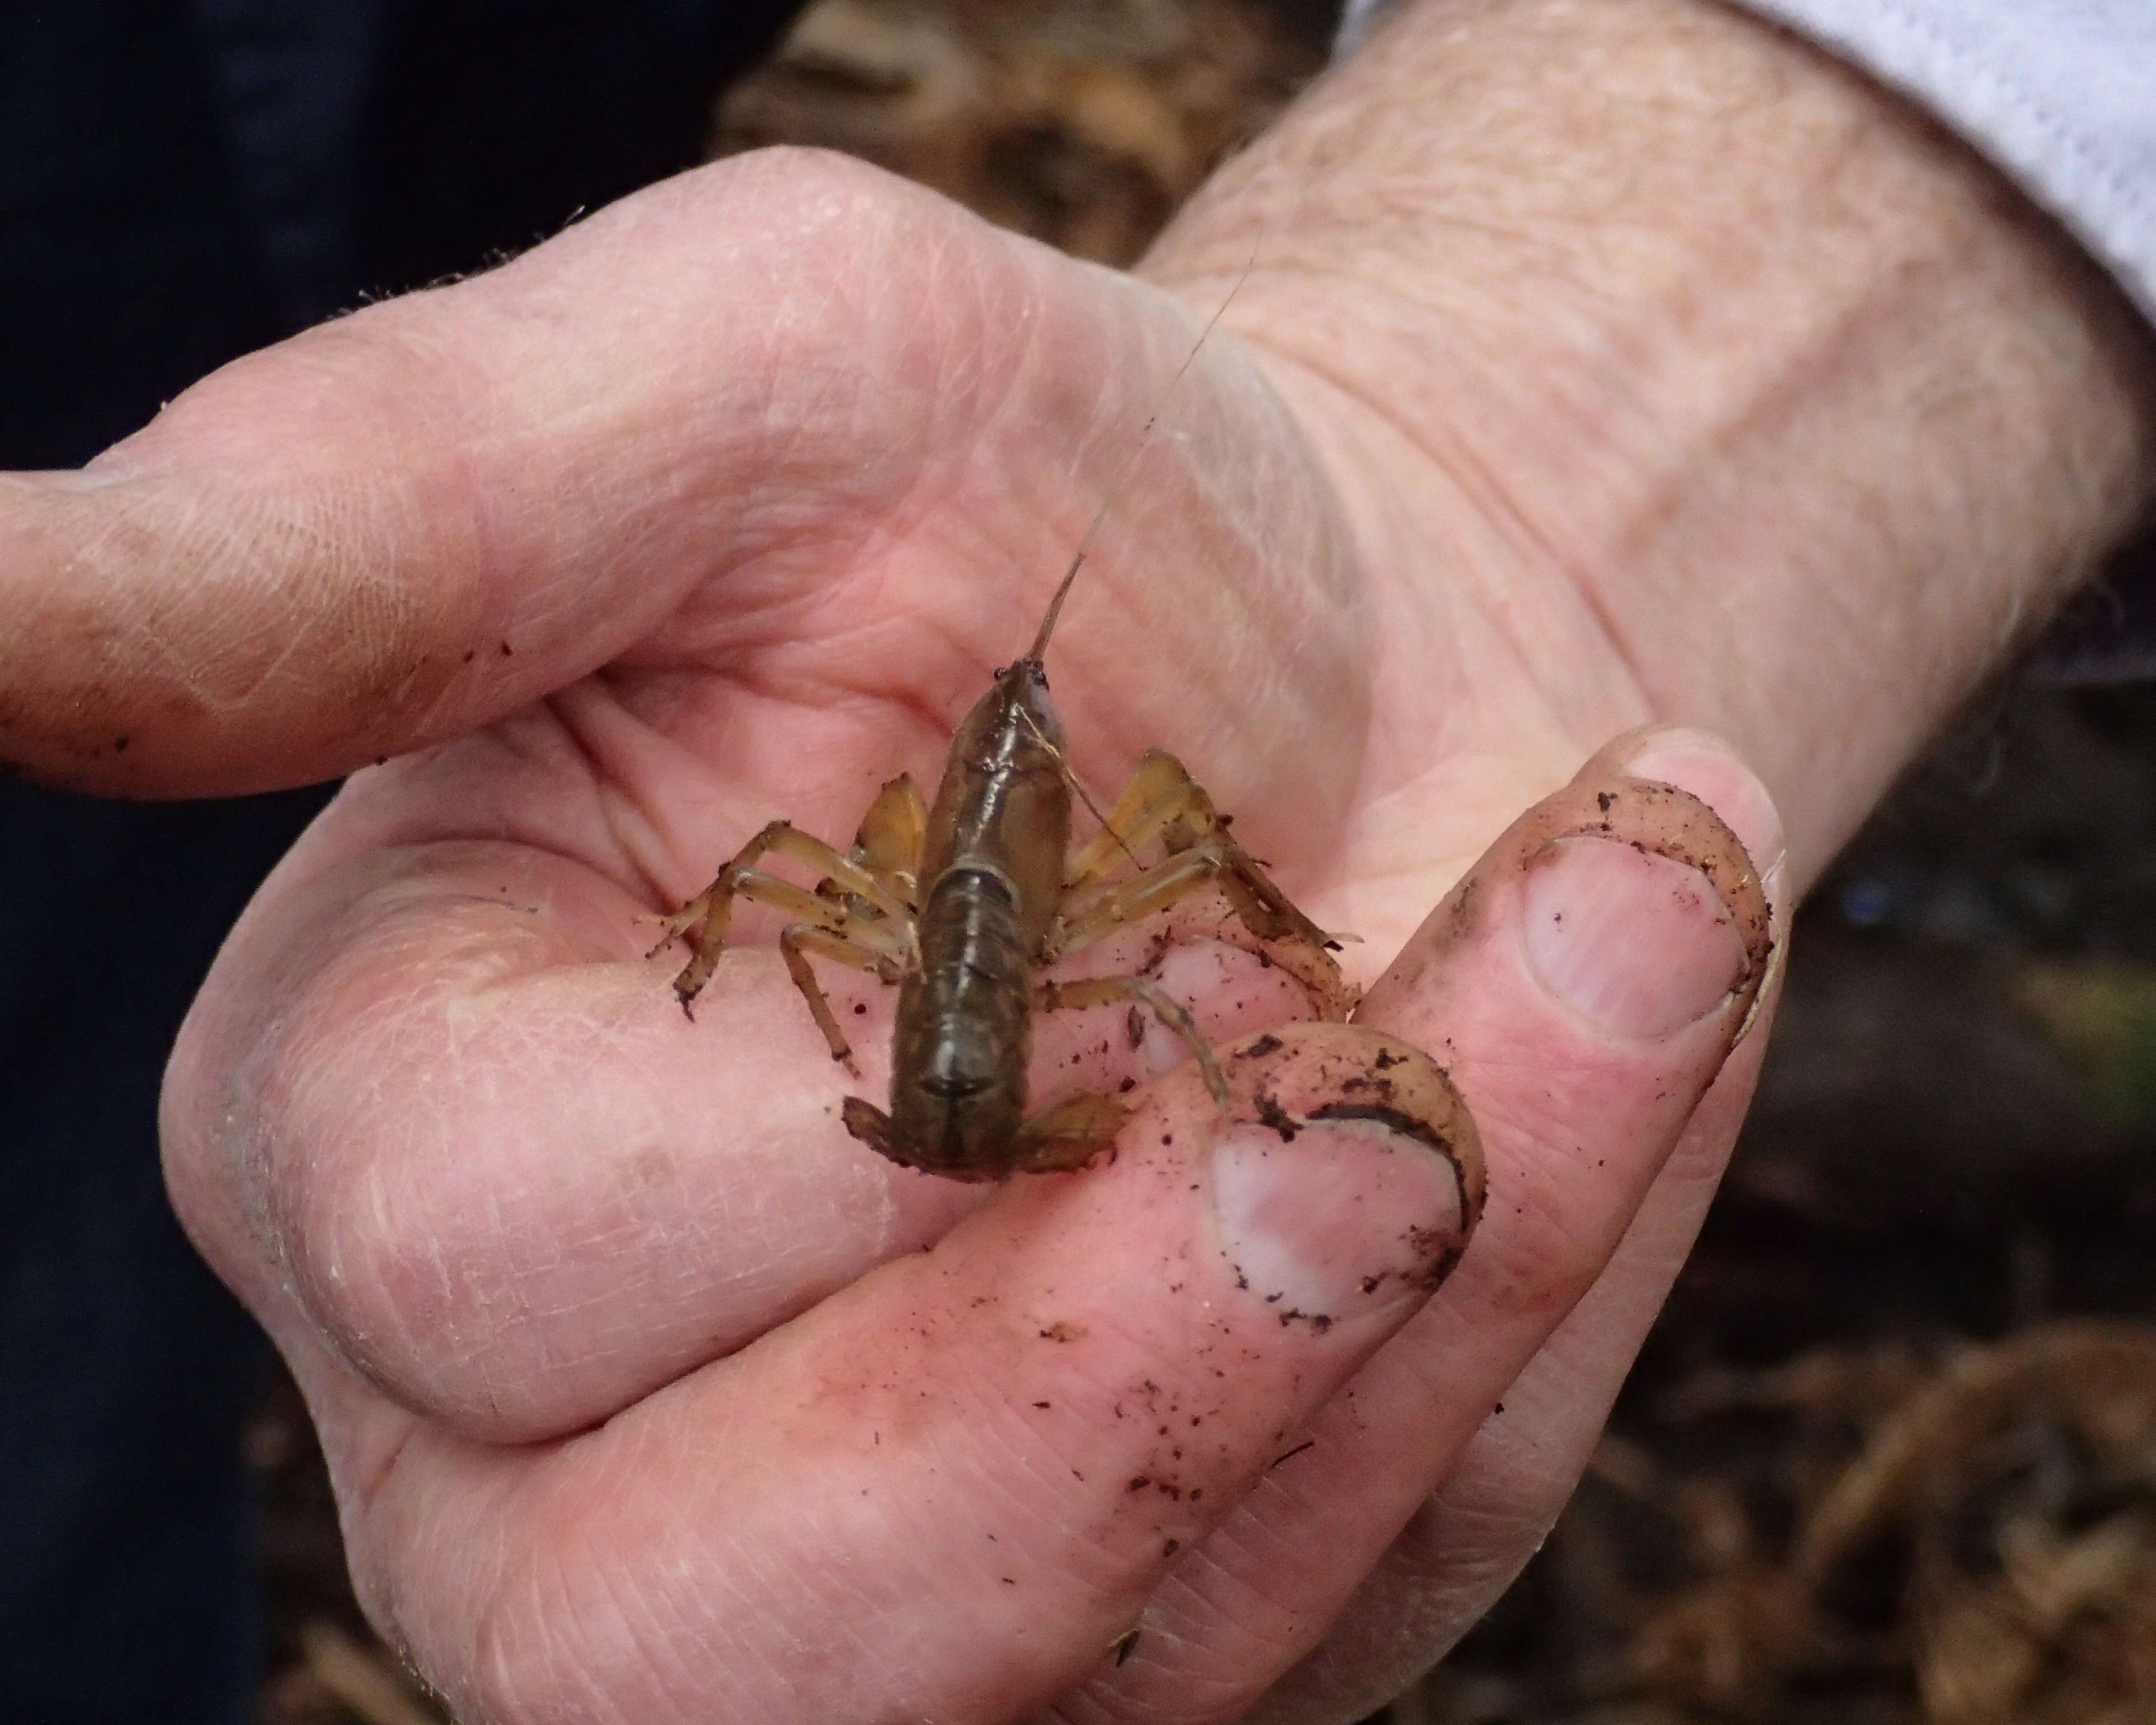 A small Central North burrowing crayfish walks along the fingers of a man’s hand. Photo: Clare Hawkins.